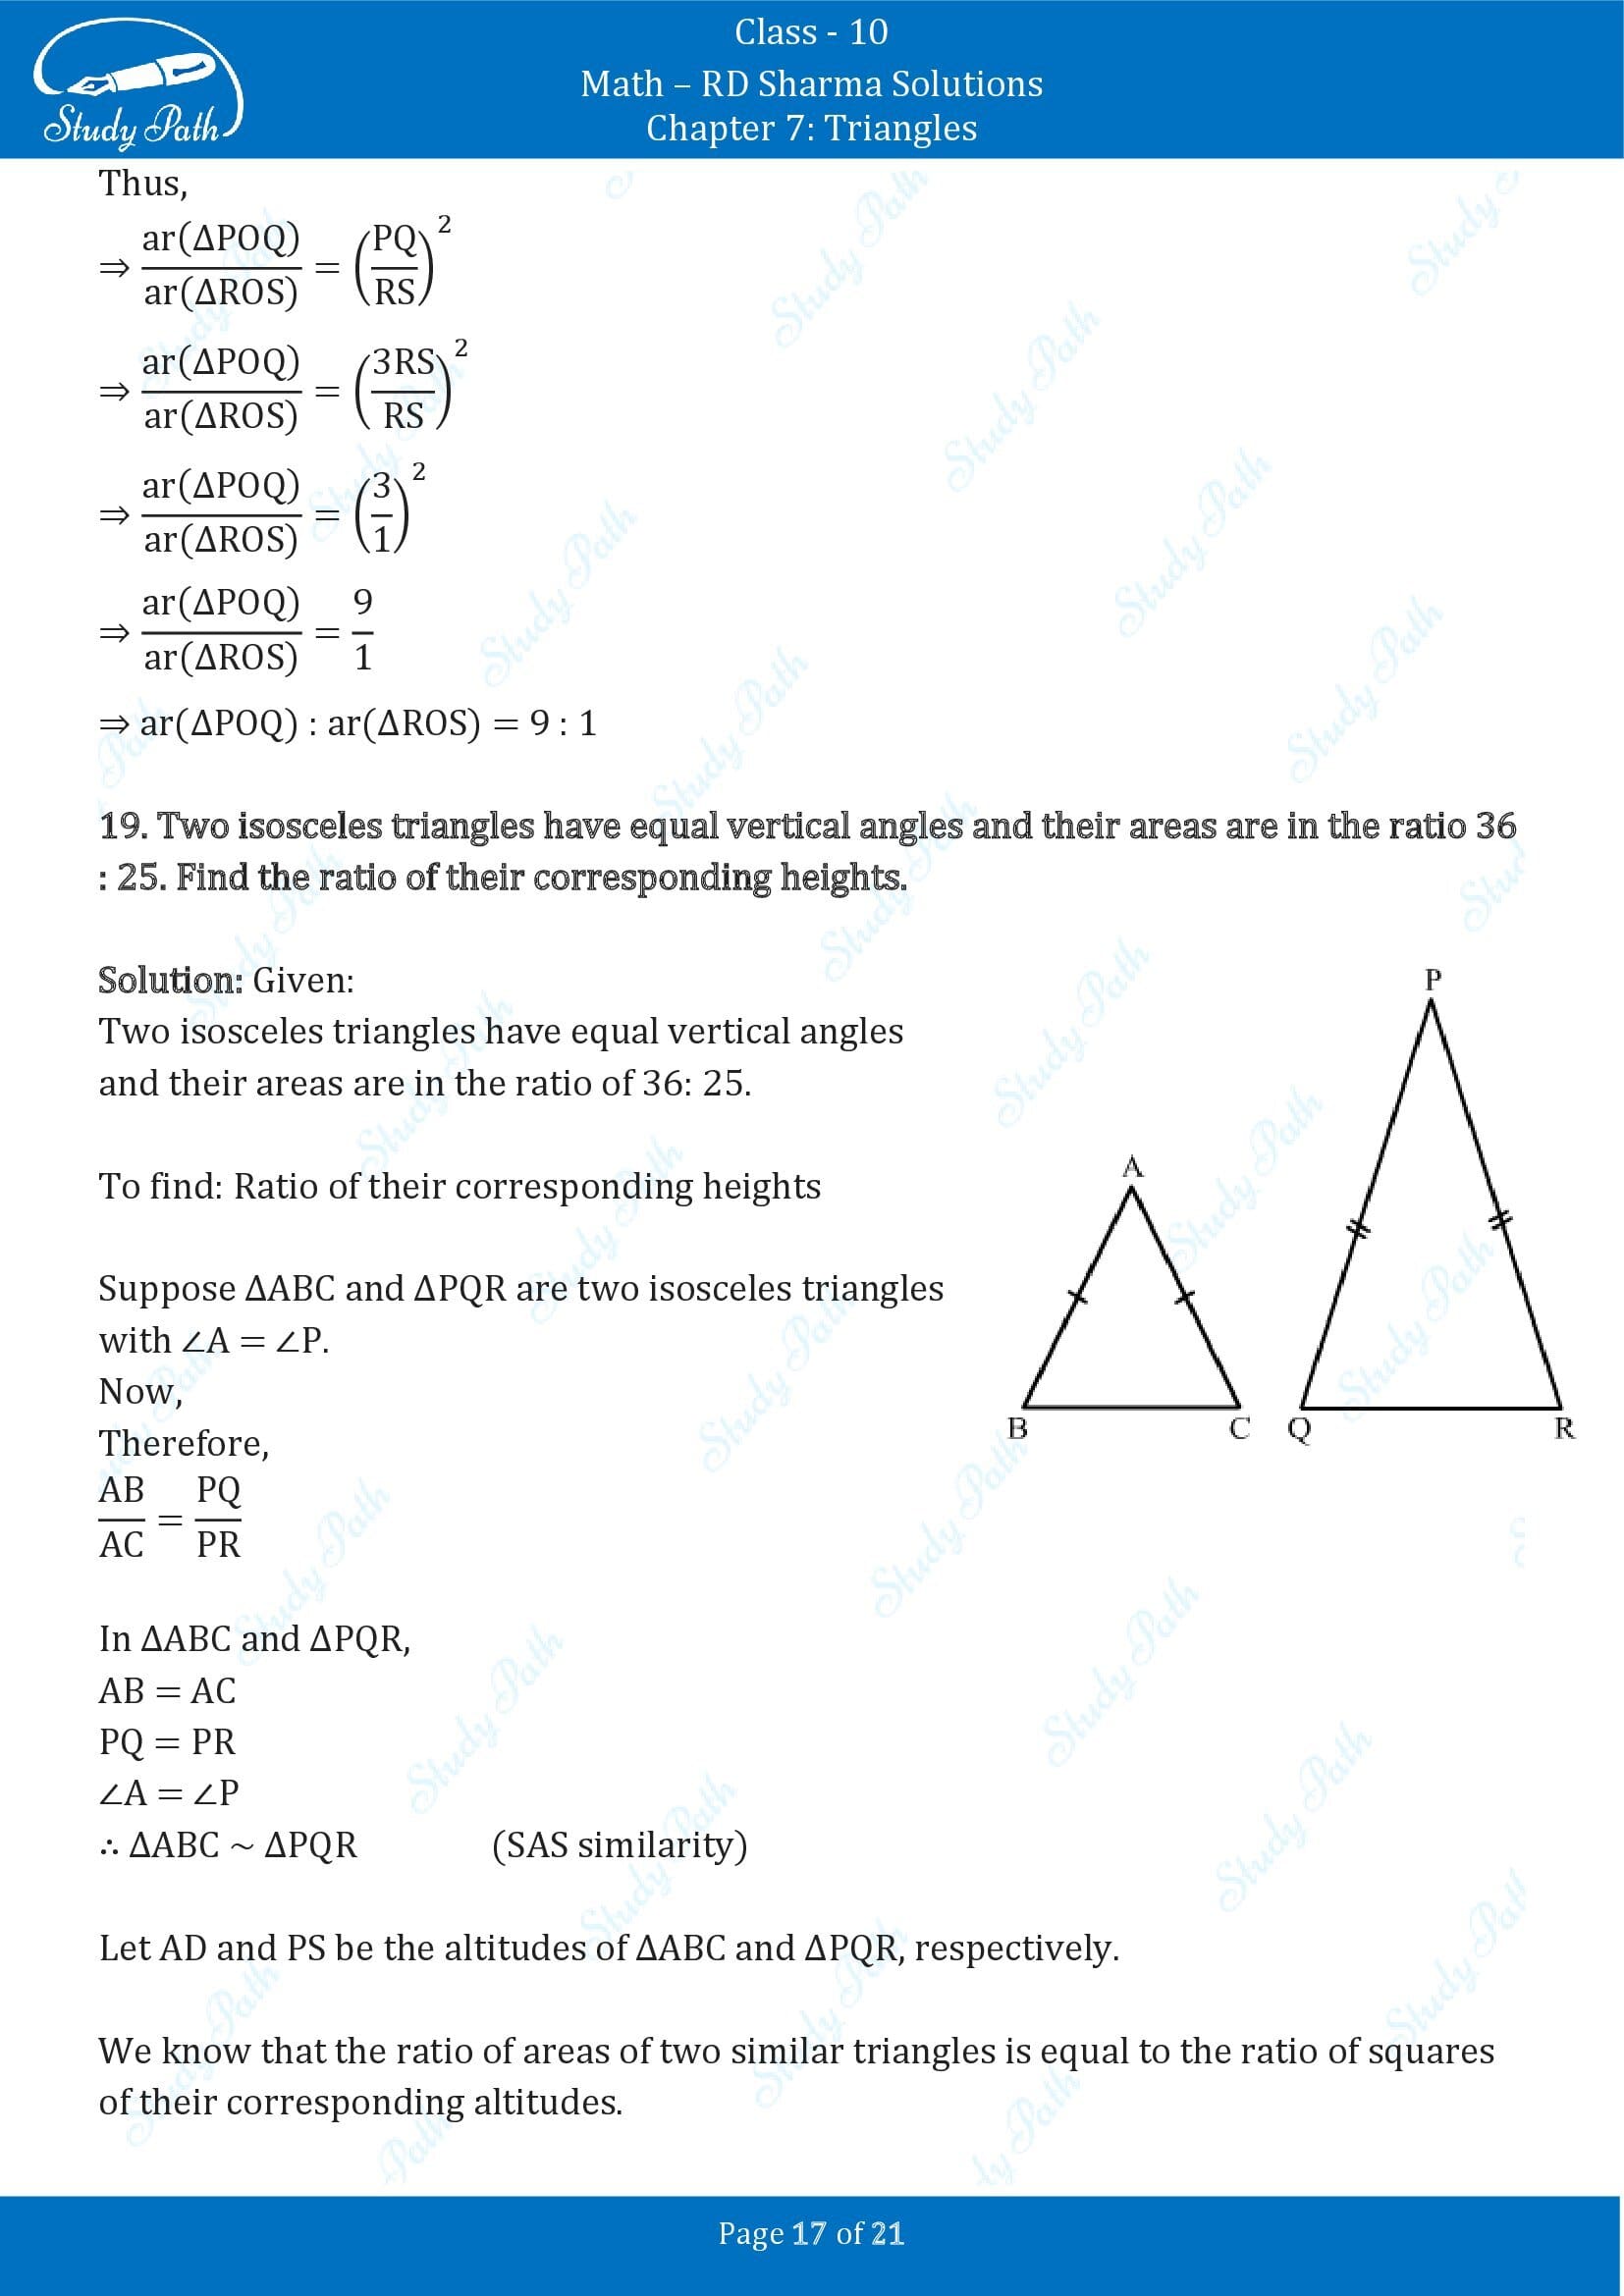 RD Sharma Solutions Class 10 Chapter 7 Triangles Exercise 7.6 00017